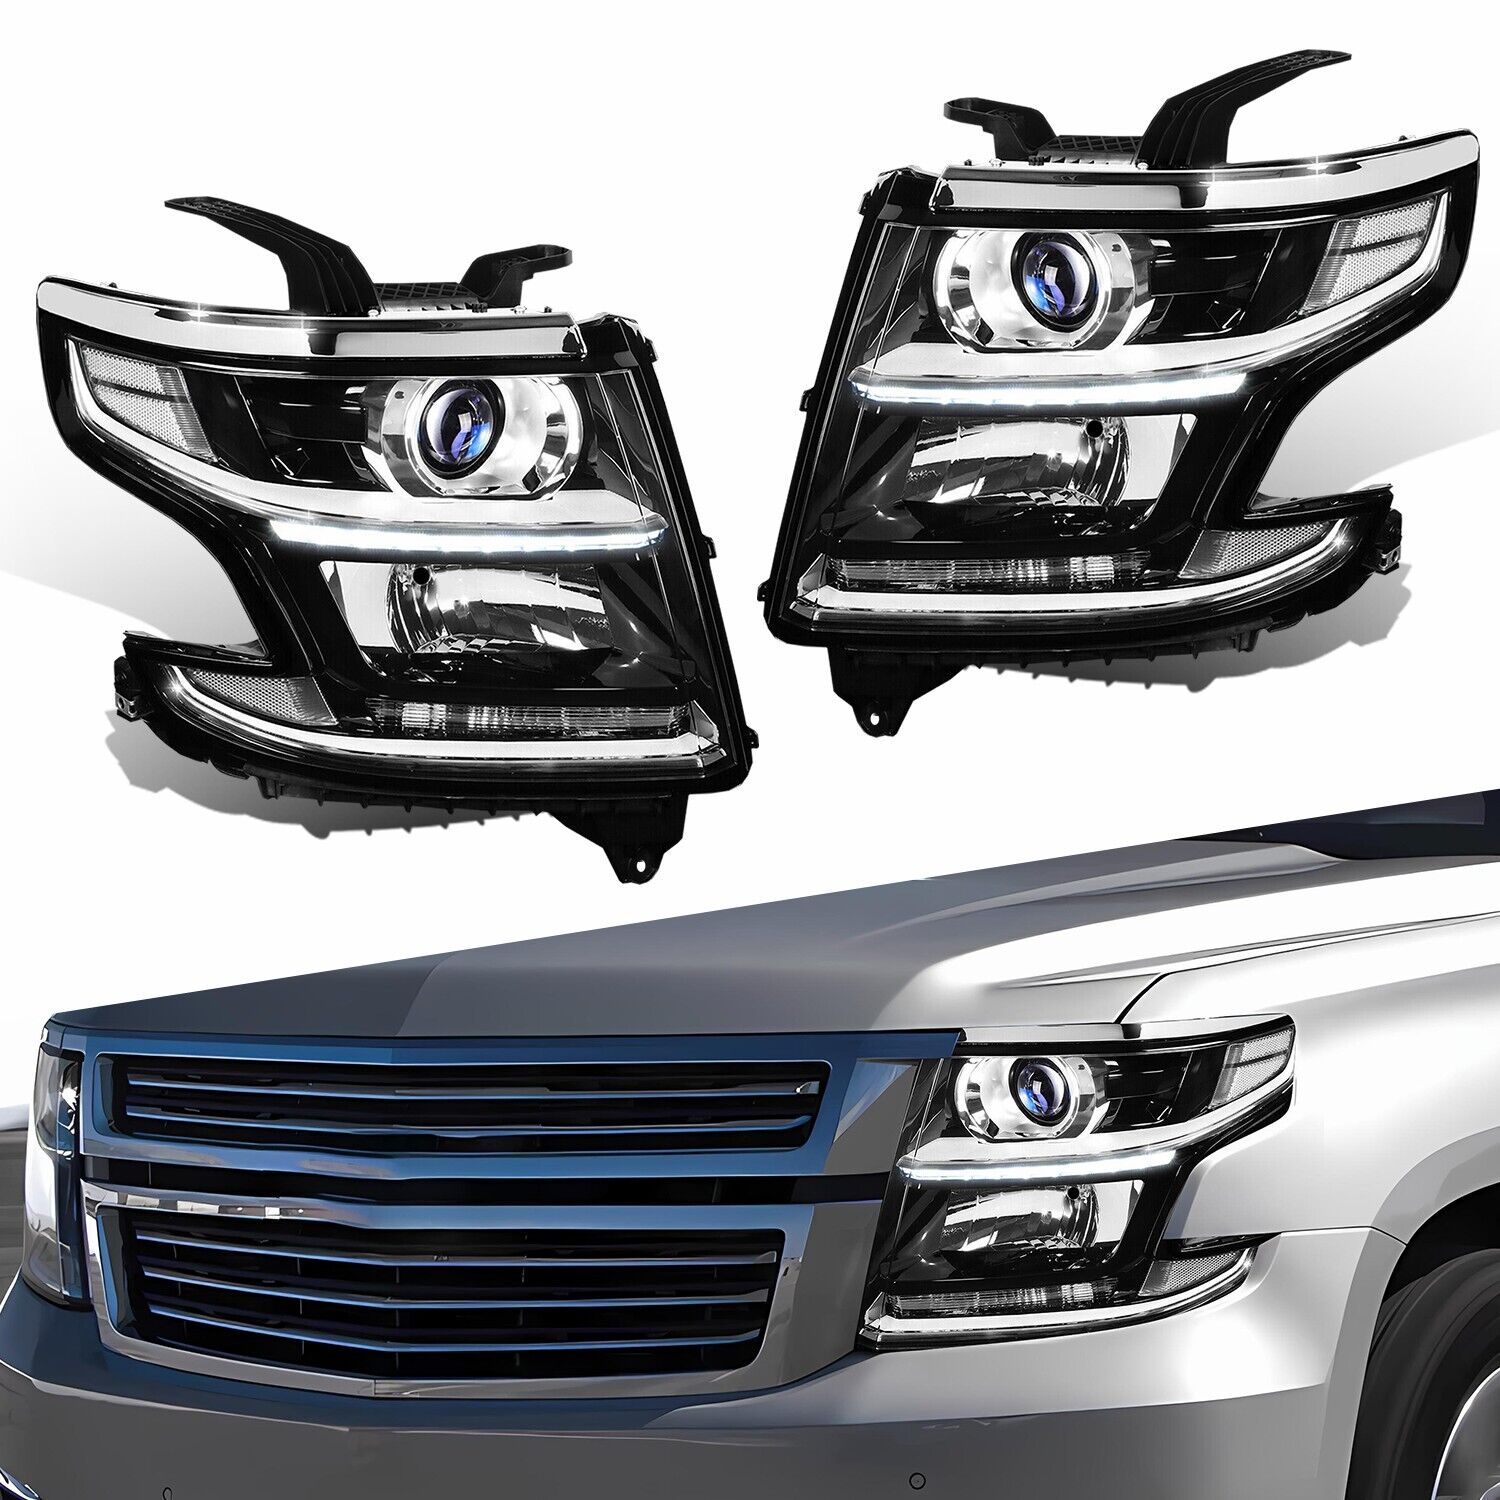 Set of 2 For 2015-20 Chevy Tahoe Suburban Headlights Headlamps Left Right EOOH G